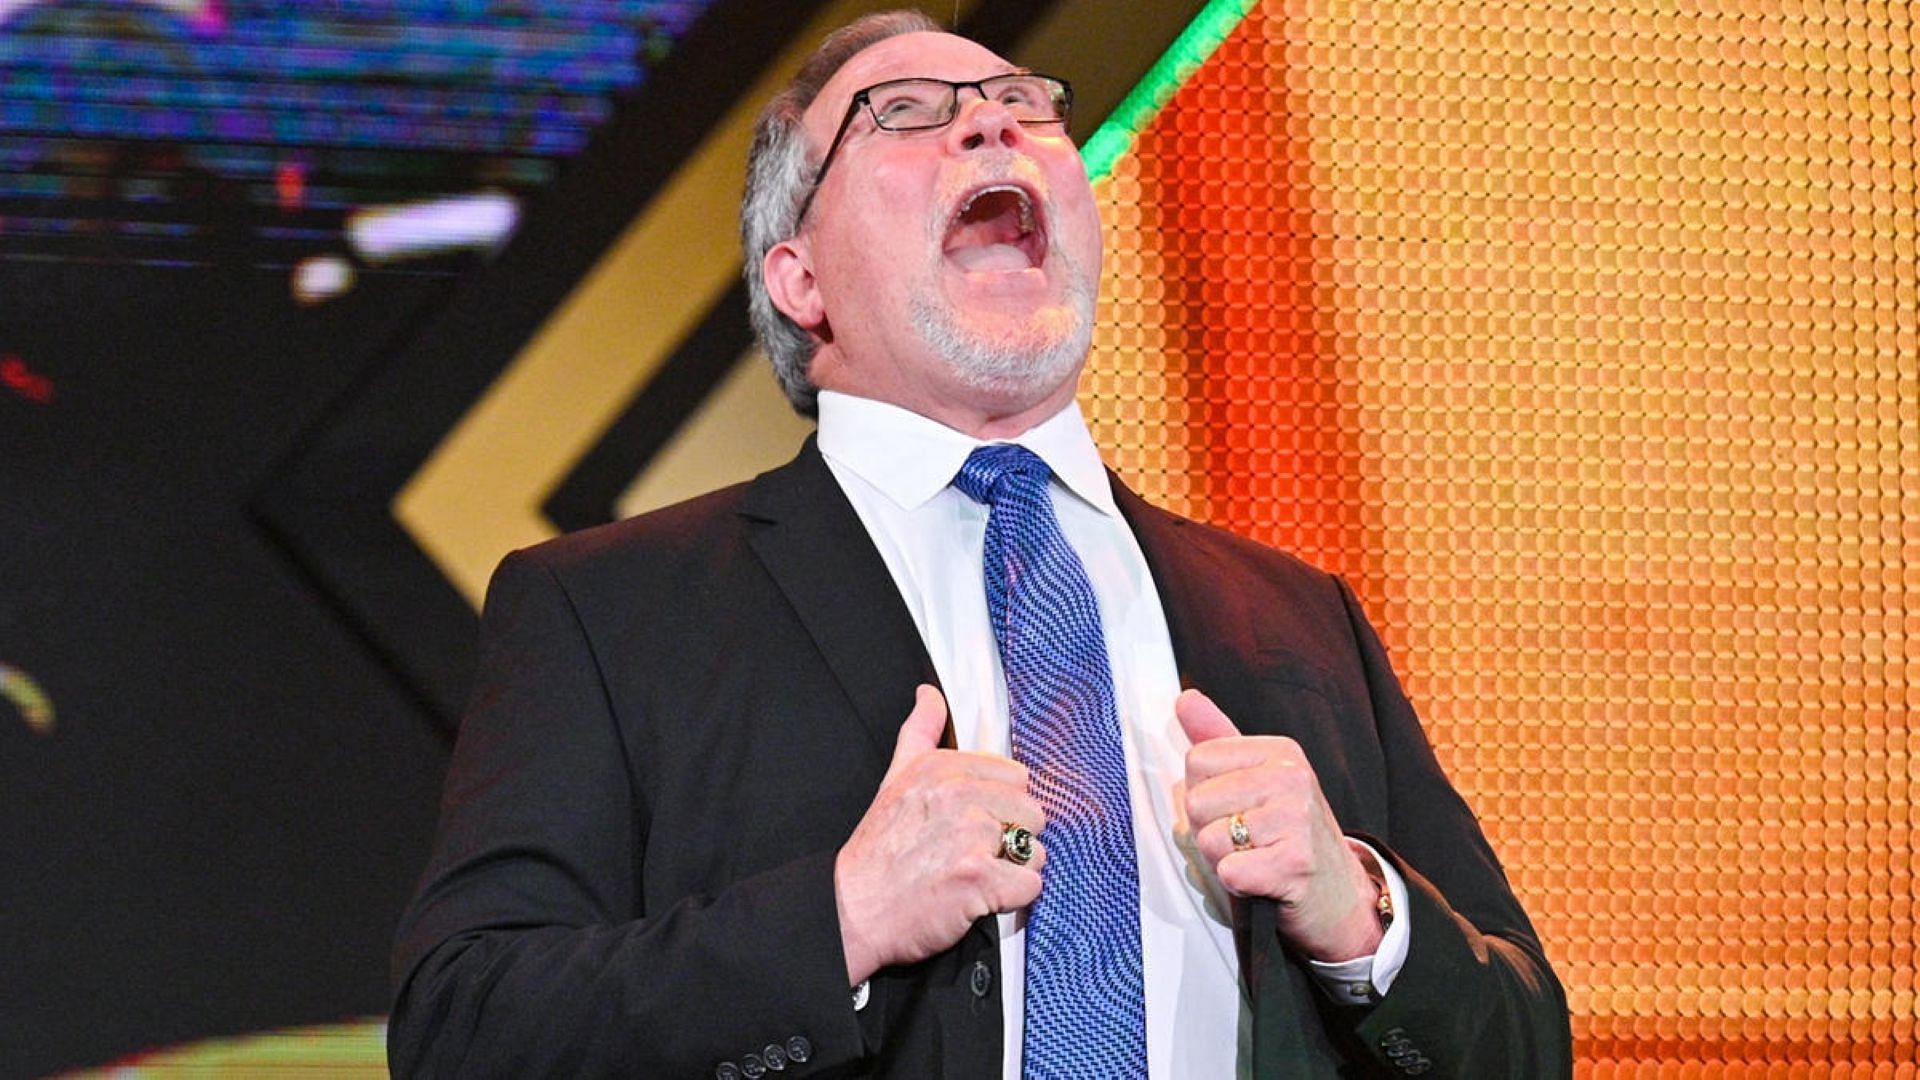 Ted DiBiase delivers his signature laugh on WWE NXT